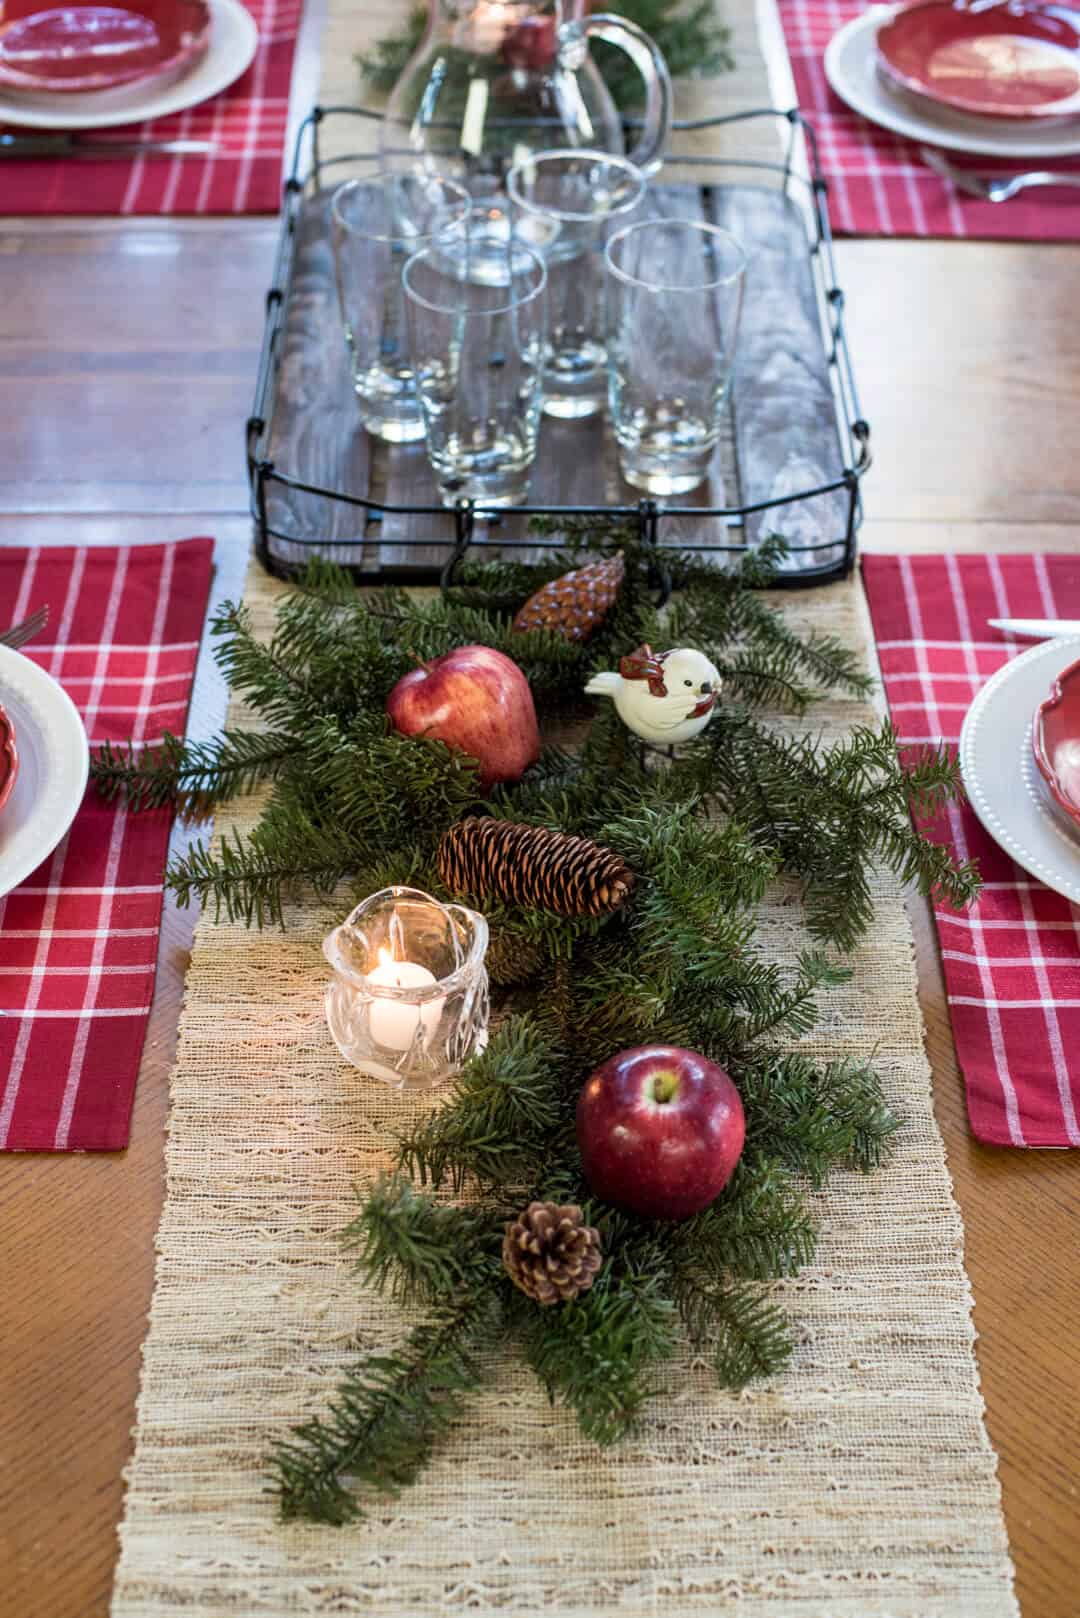 A pretty holiday tablescape with pine branches, pine cones, apples, birds, and candles.